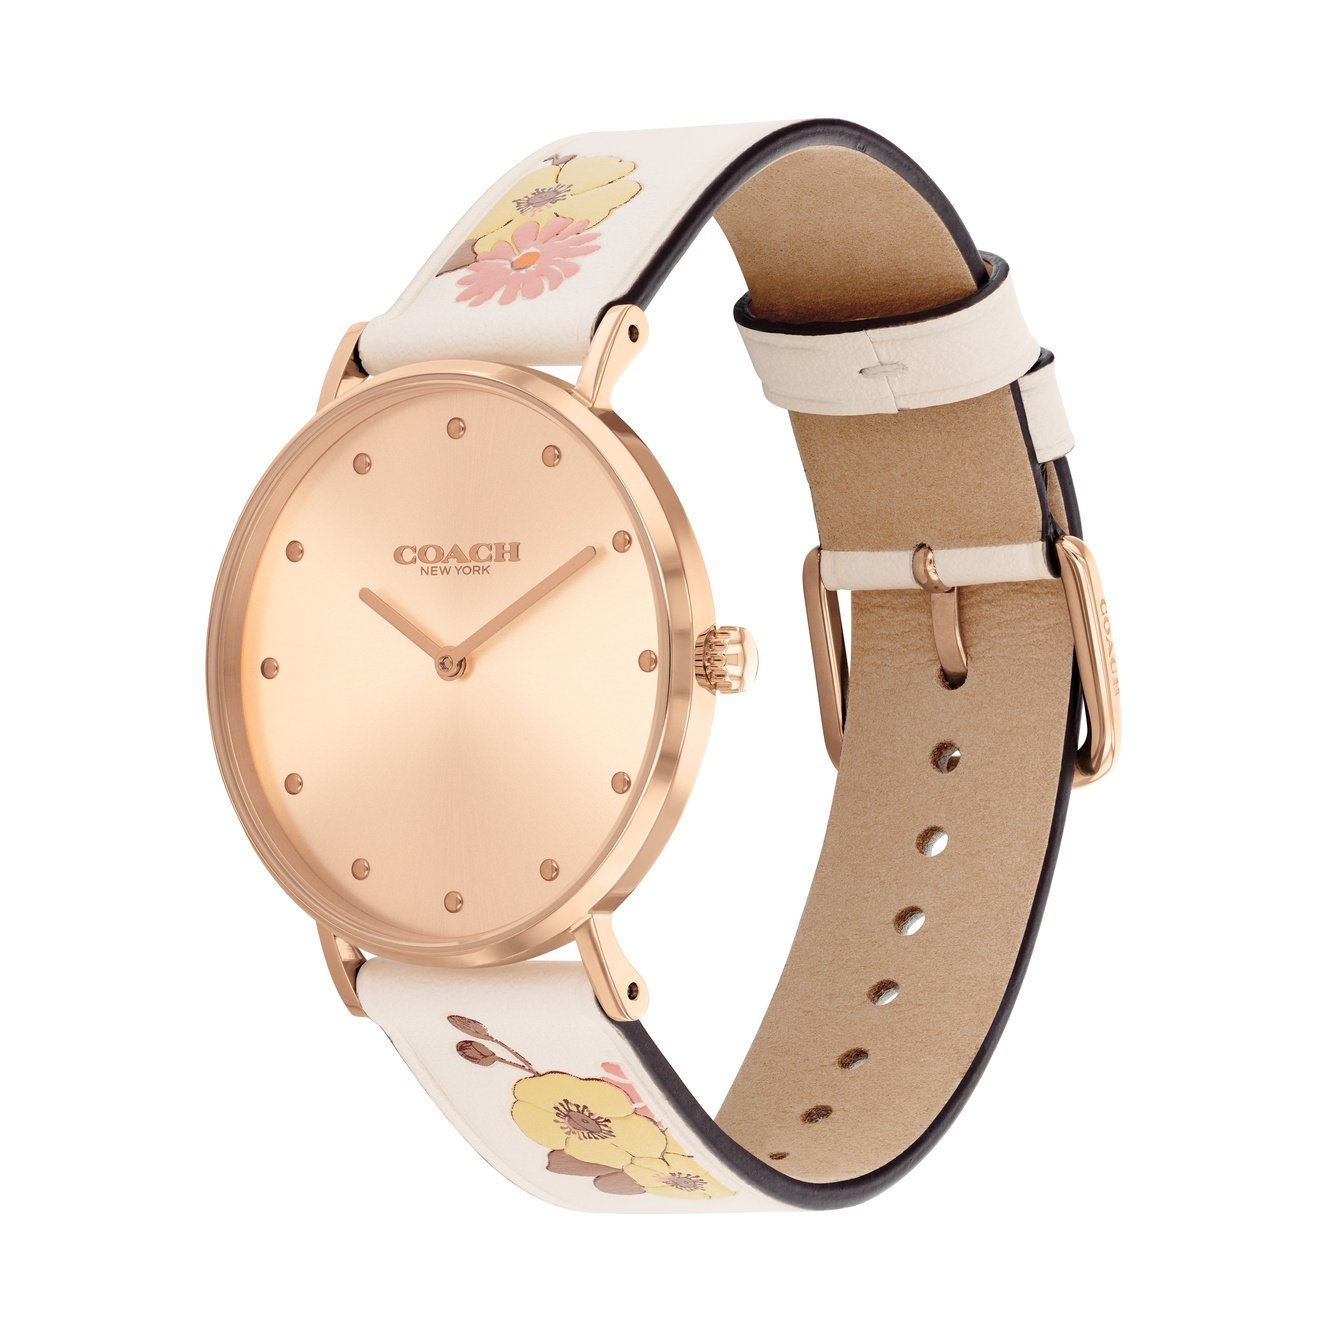 Ladies Perry Watch 14503920 Coach